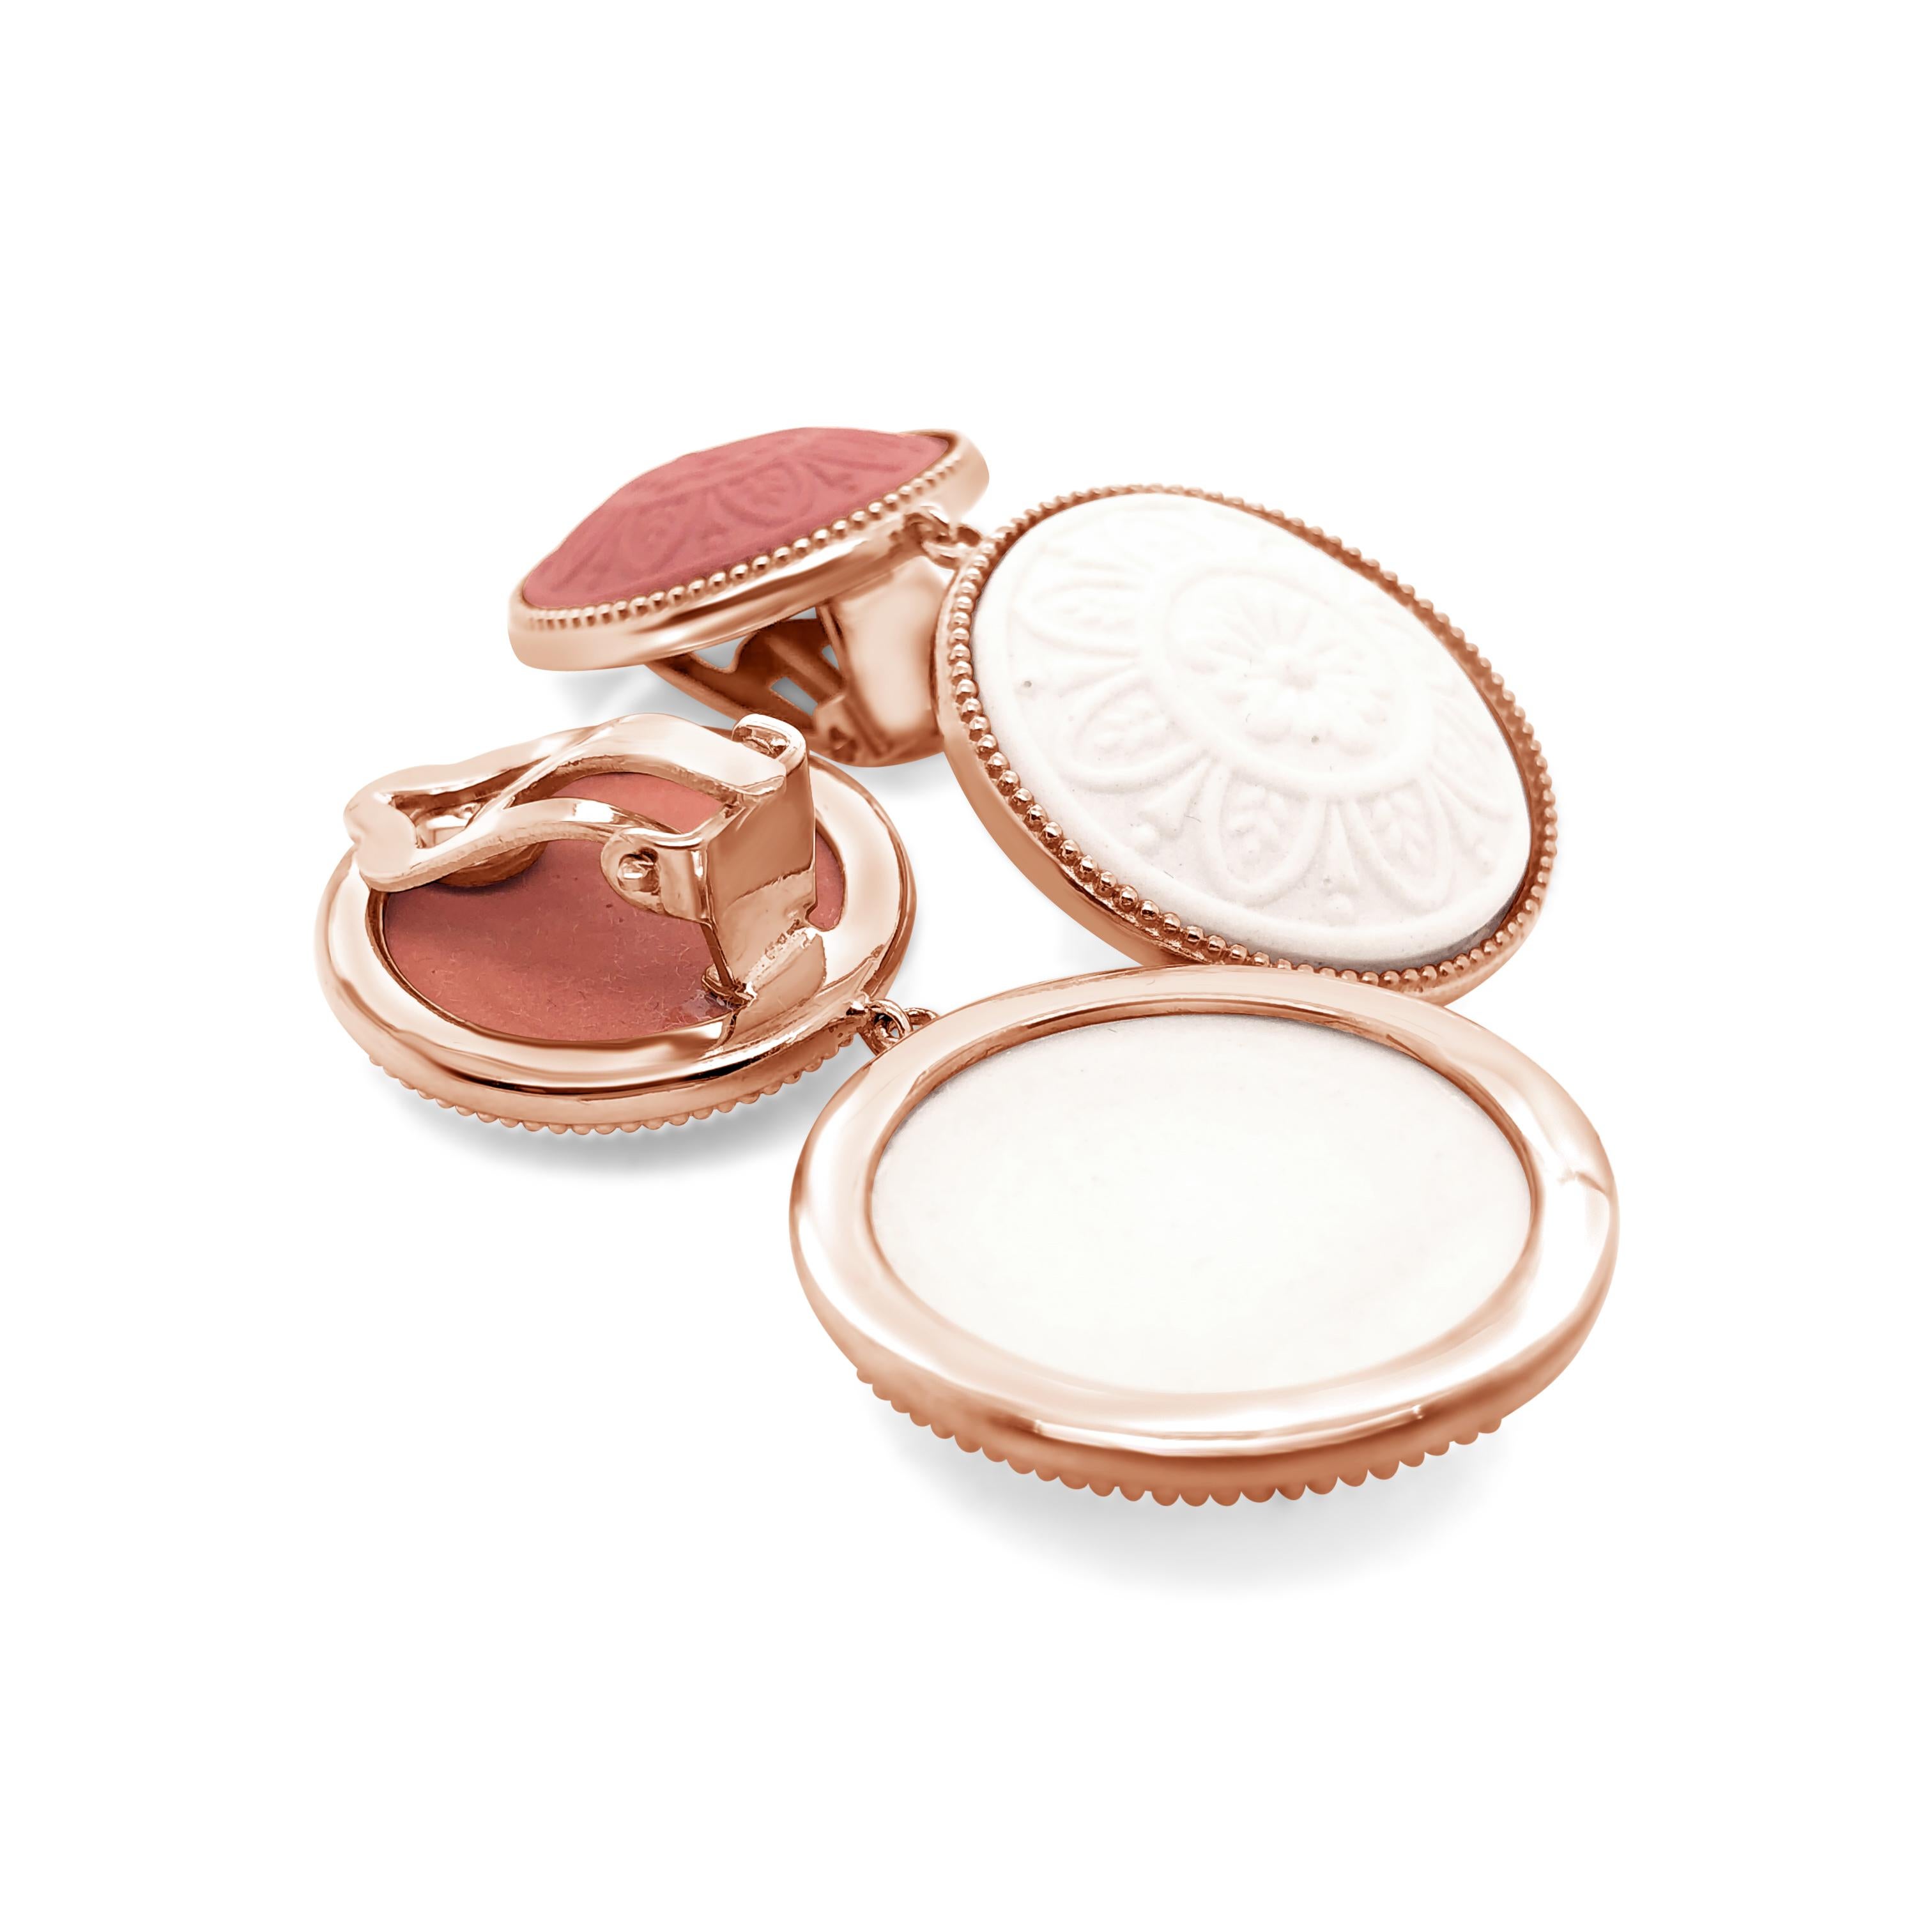 Beautifully hand crafted porcelain cameos earrings mounted in 18k rose gold vermeil. In times past, cameos were mainly made of shells, hardstones, coral and volcanic rock, instead today the cameos which bears our family’s signature are made of fine